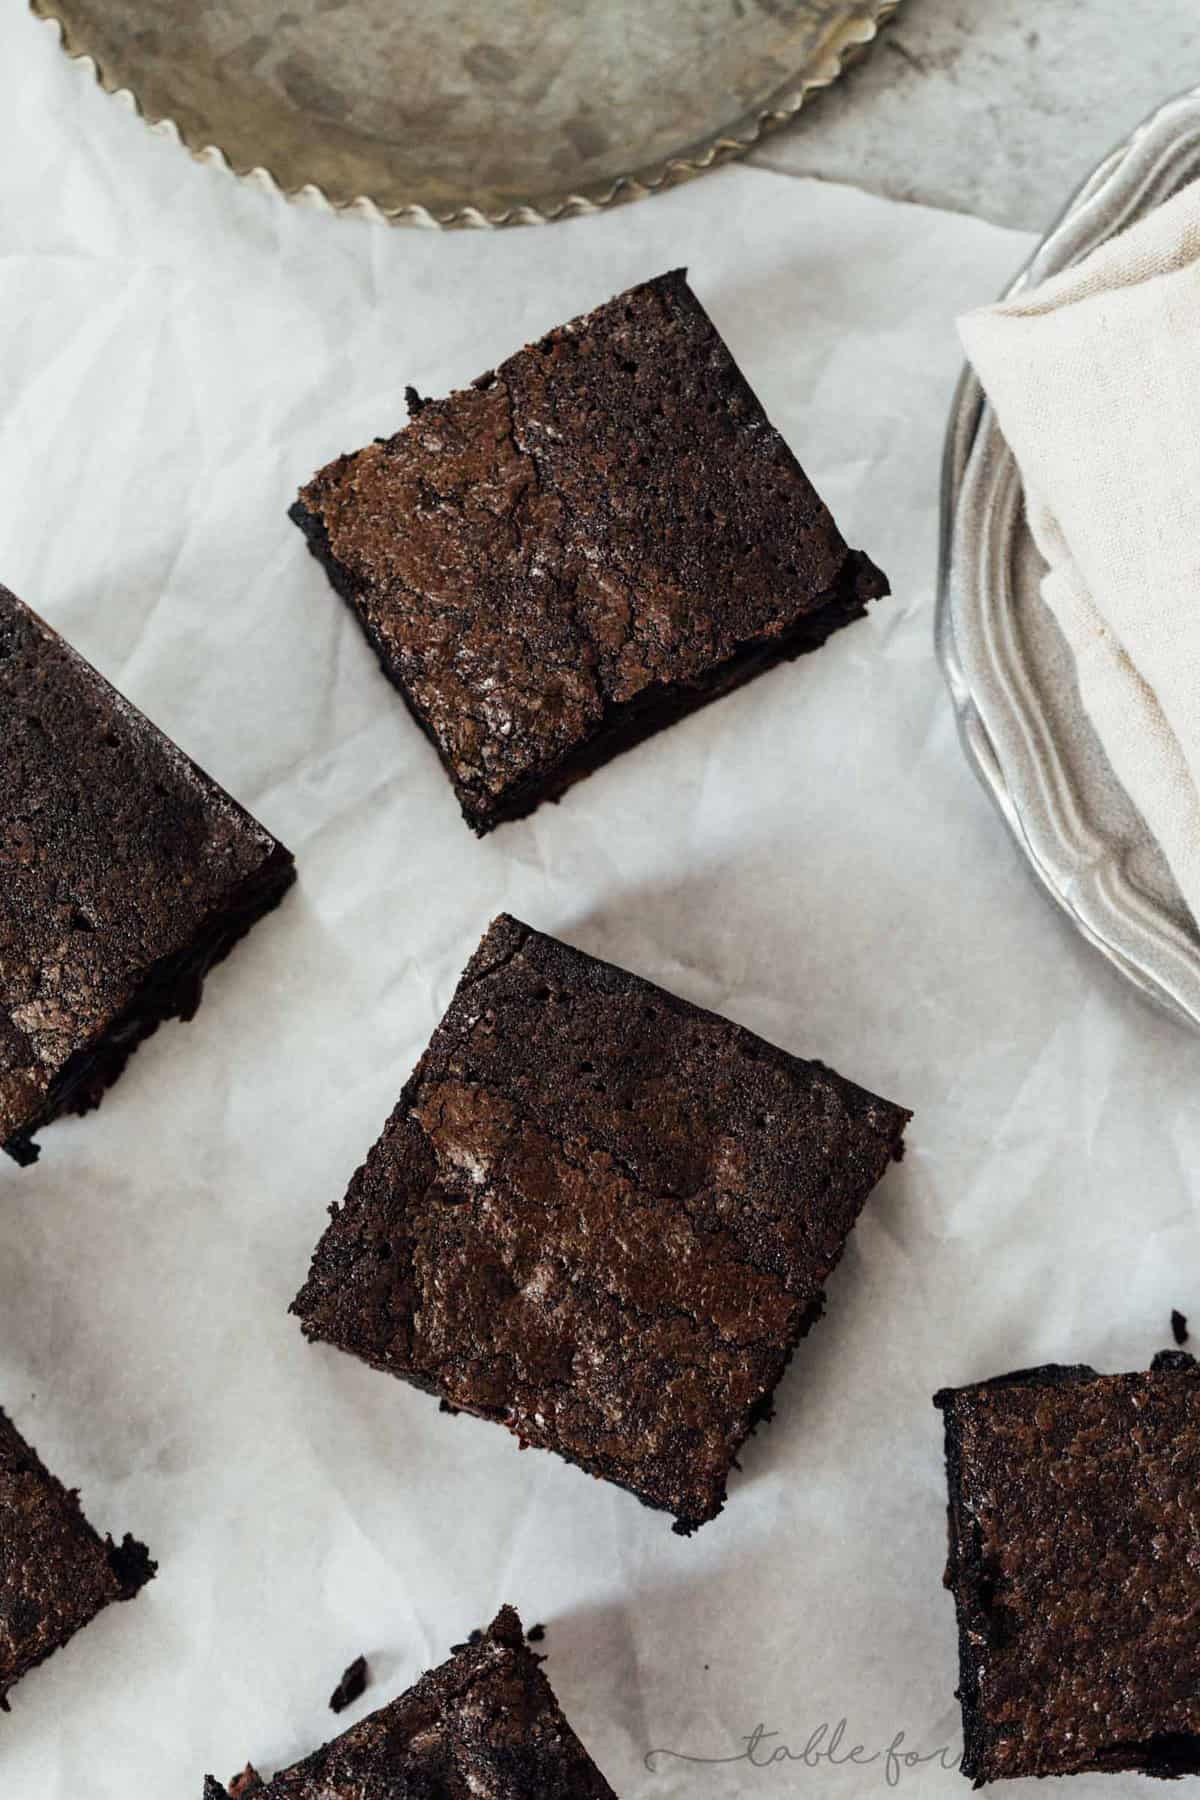 These exceptionally decadent and fudgy dirty chai dark chocolate brownies will elevate your brownie experience. You won't be able to resist just one! The hardest part is waiting for them to bake and then cool!